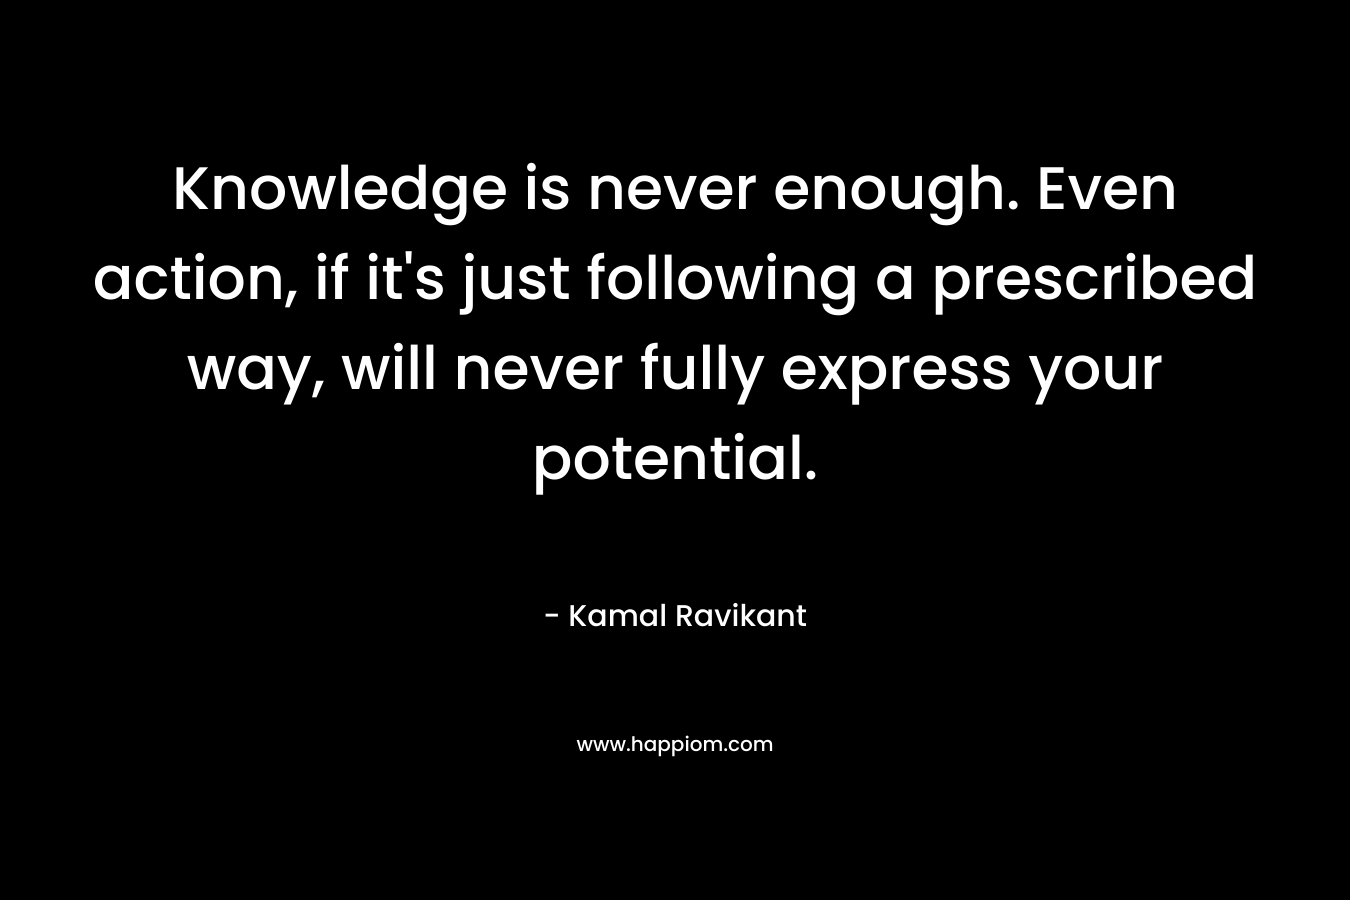 Knowledge is never enough. Even action, if it's just following a prescribed way, will never fully express your potential.